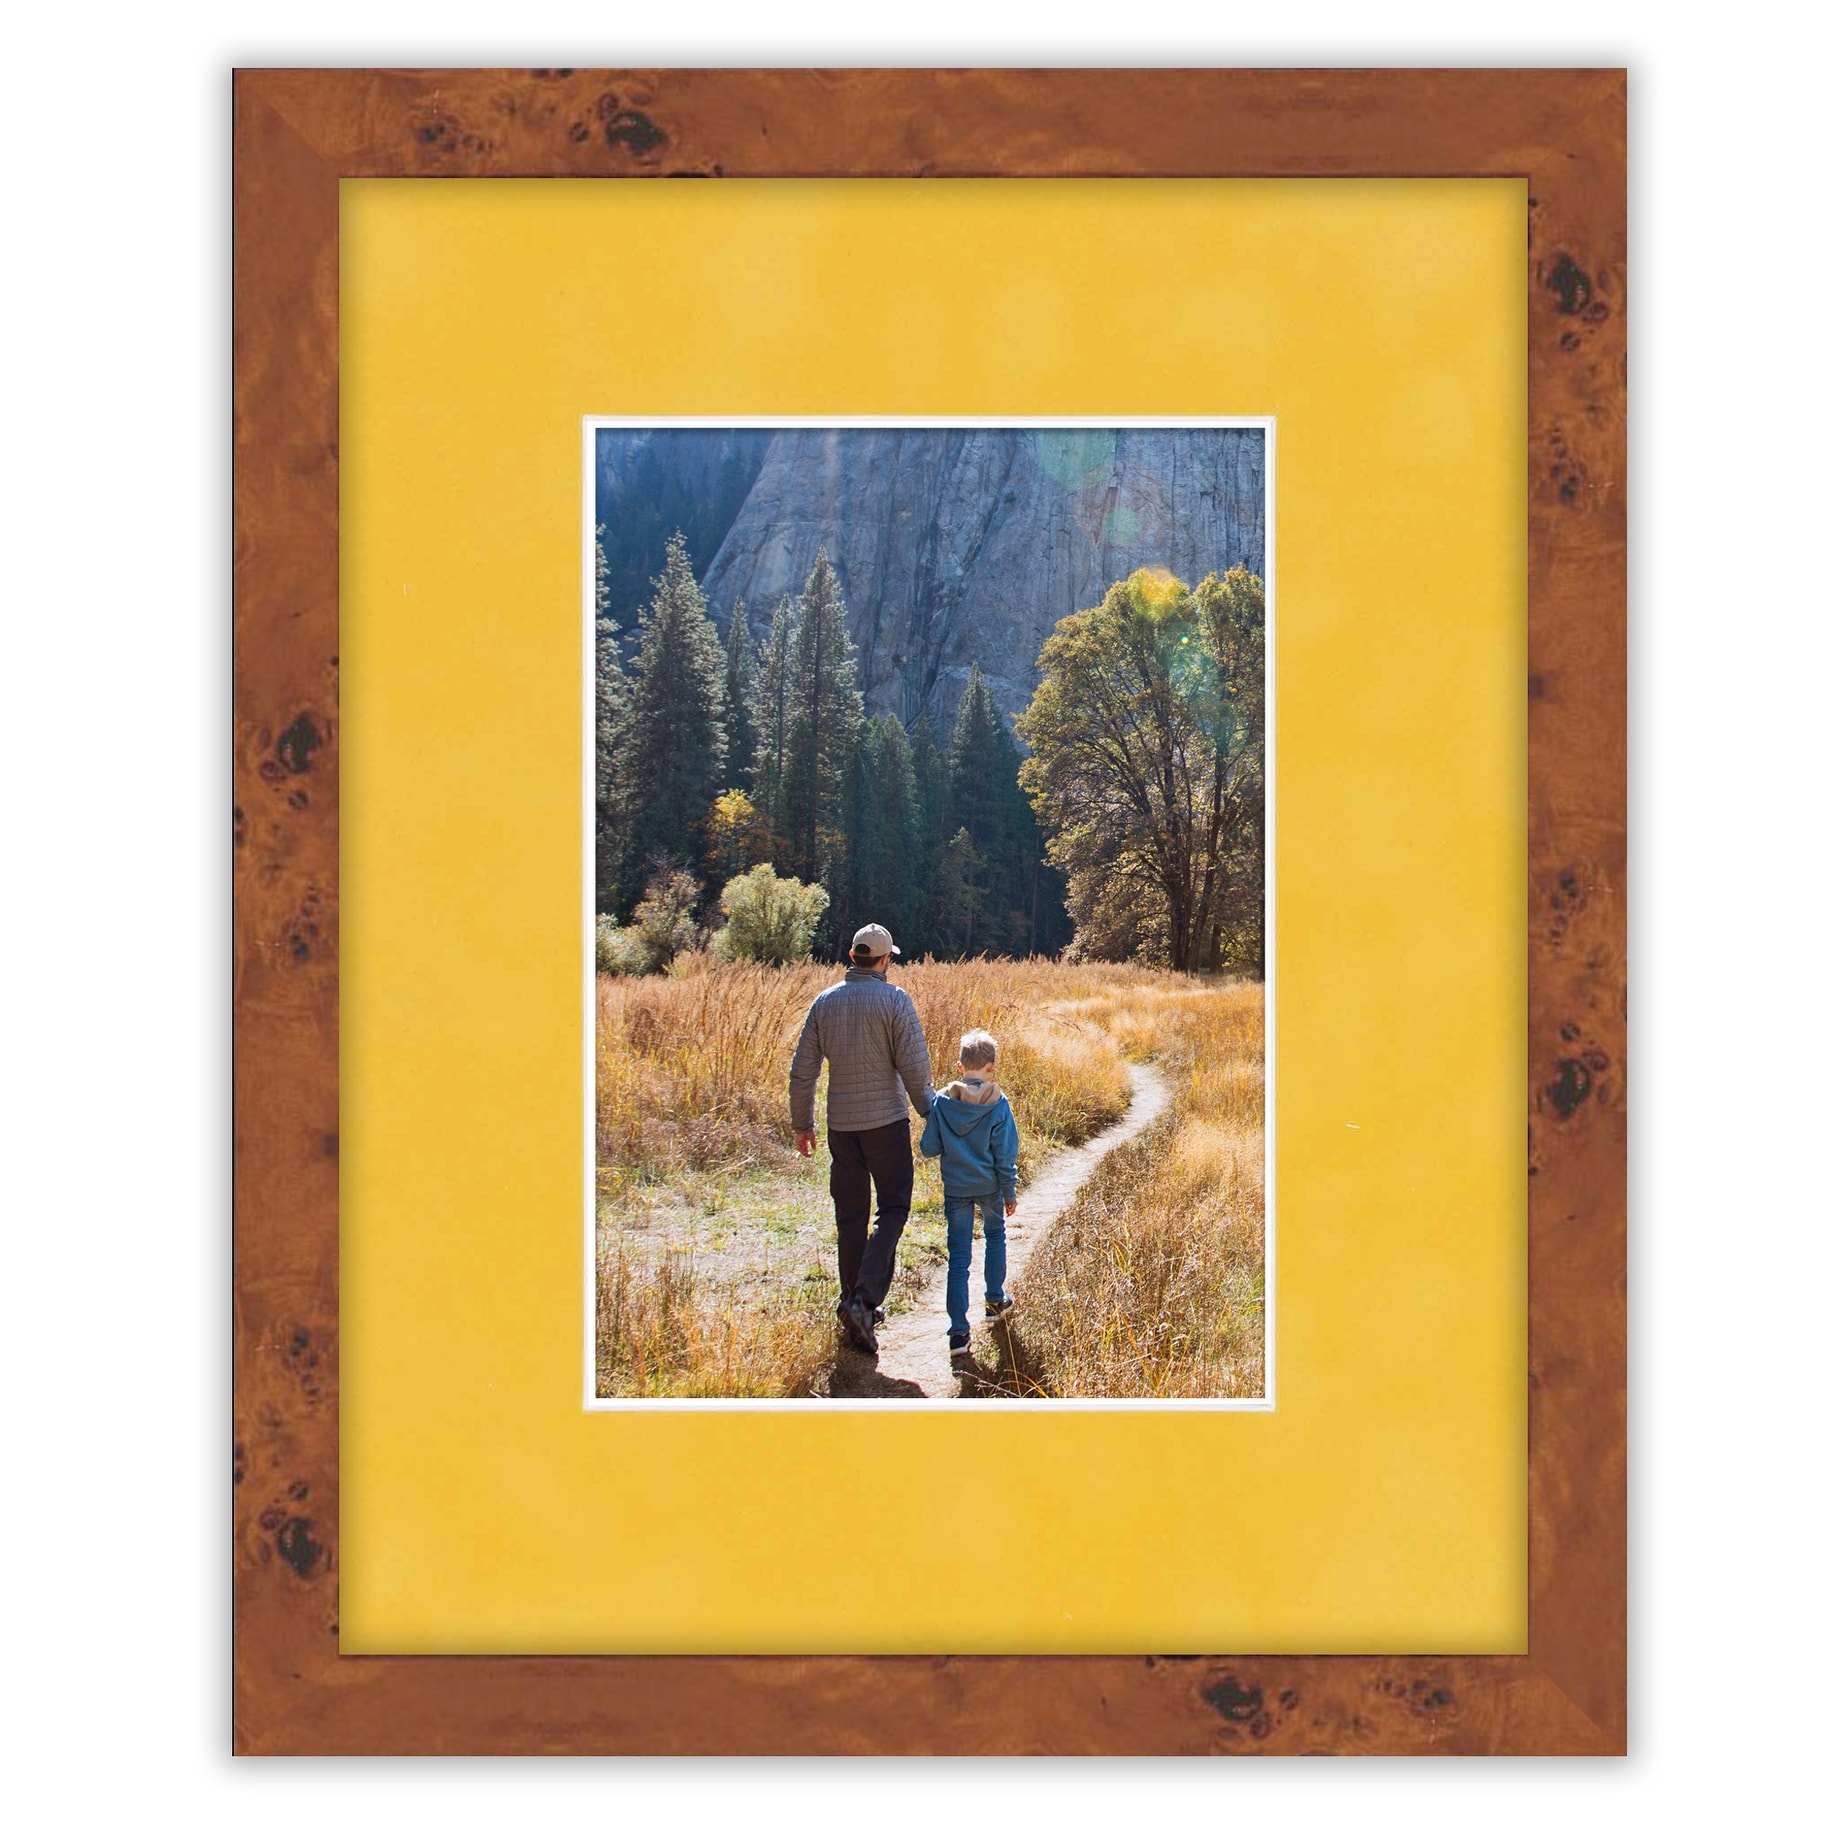 8x10 Mat for 5x7 Photo - Precut Sunrise Yellow Suede Picture Matboard for  Frames Measuring 8 x 10 Inches - Bevel Cut Matte to Display Art Measuring 5